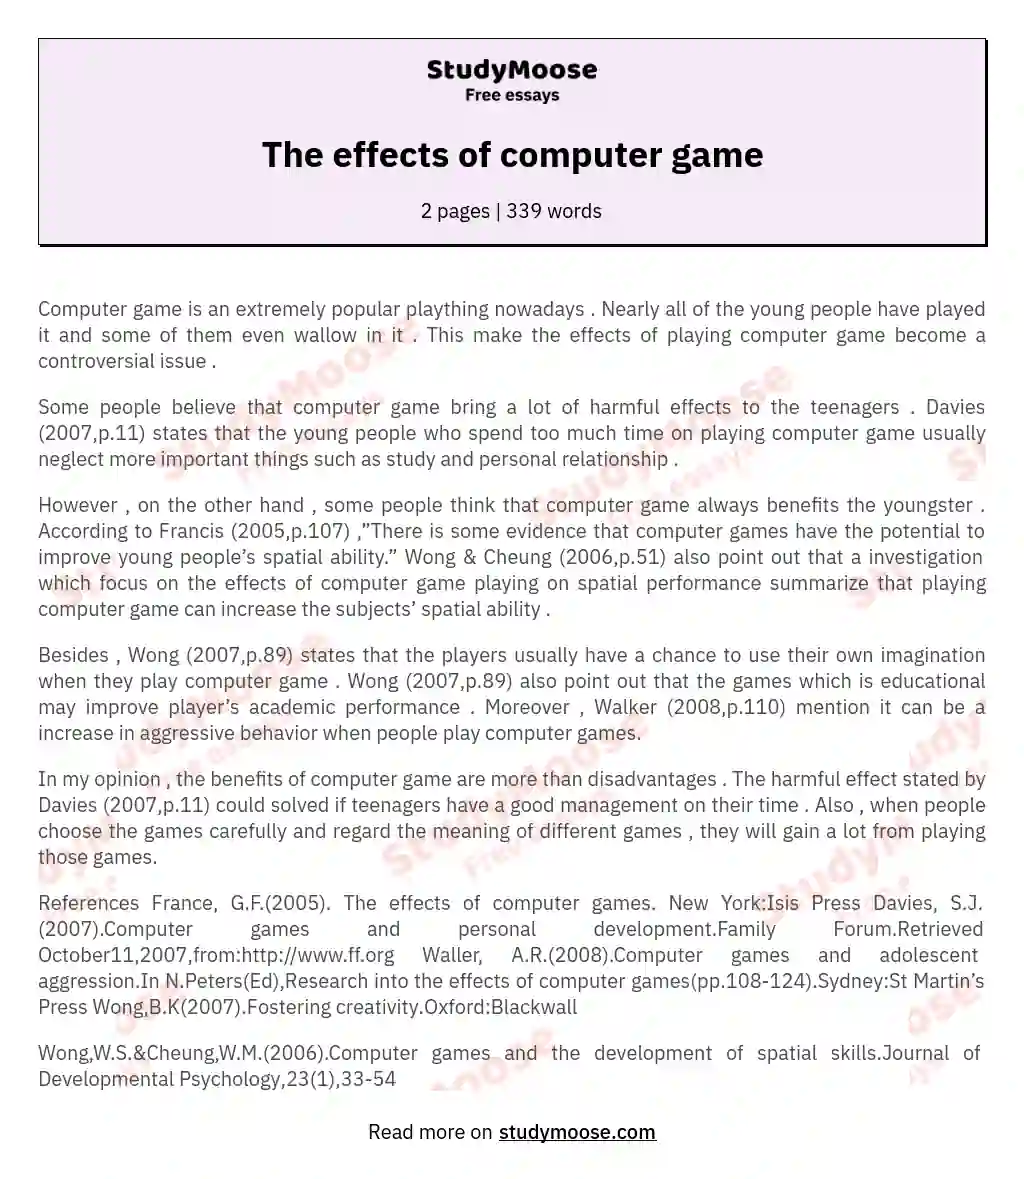 negative impacts of playing computer games essay